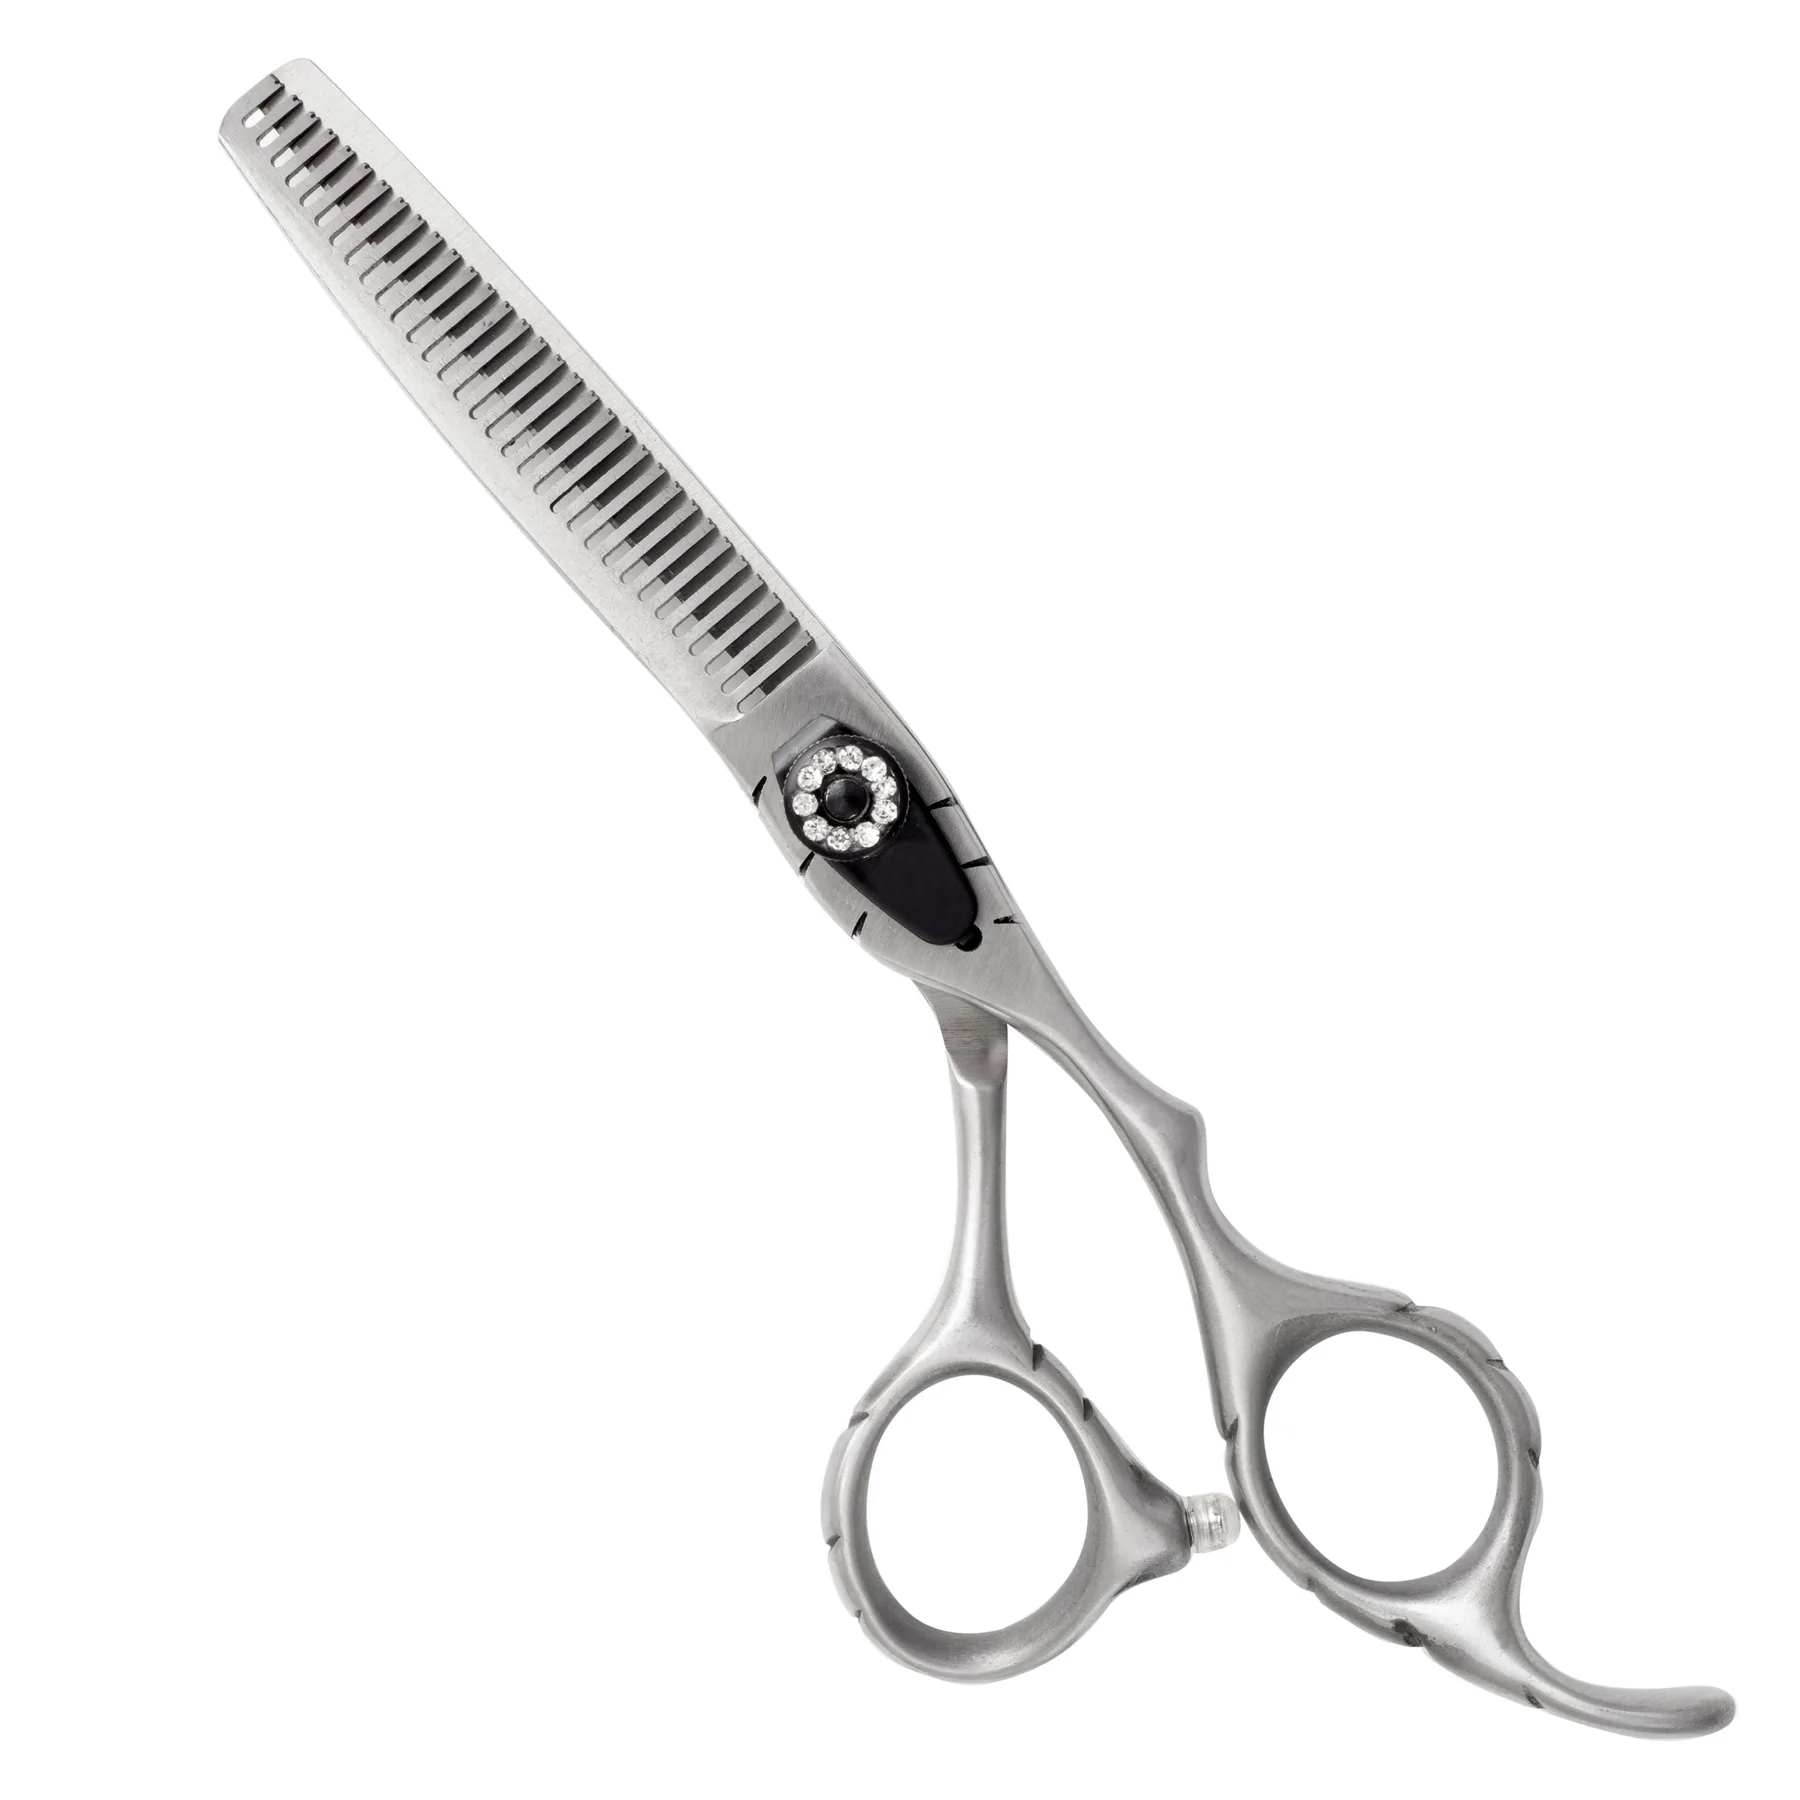 PROFESSIONAL CURVED THINNING SCISSORS 6.0